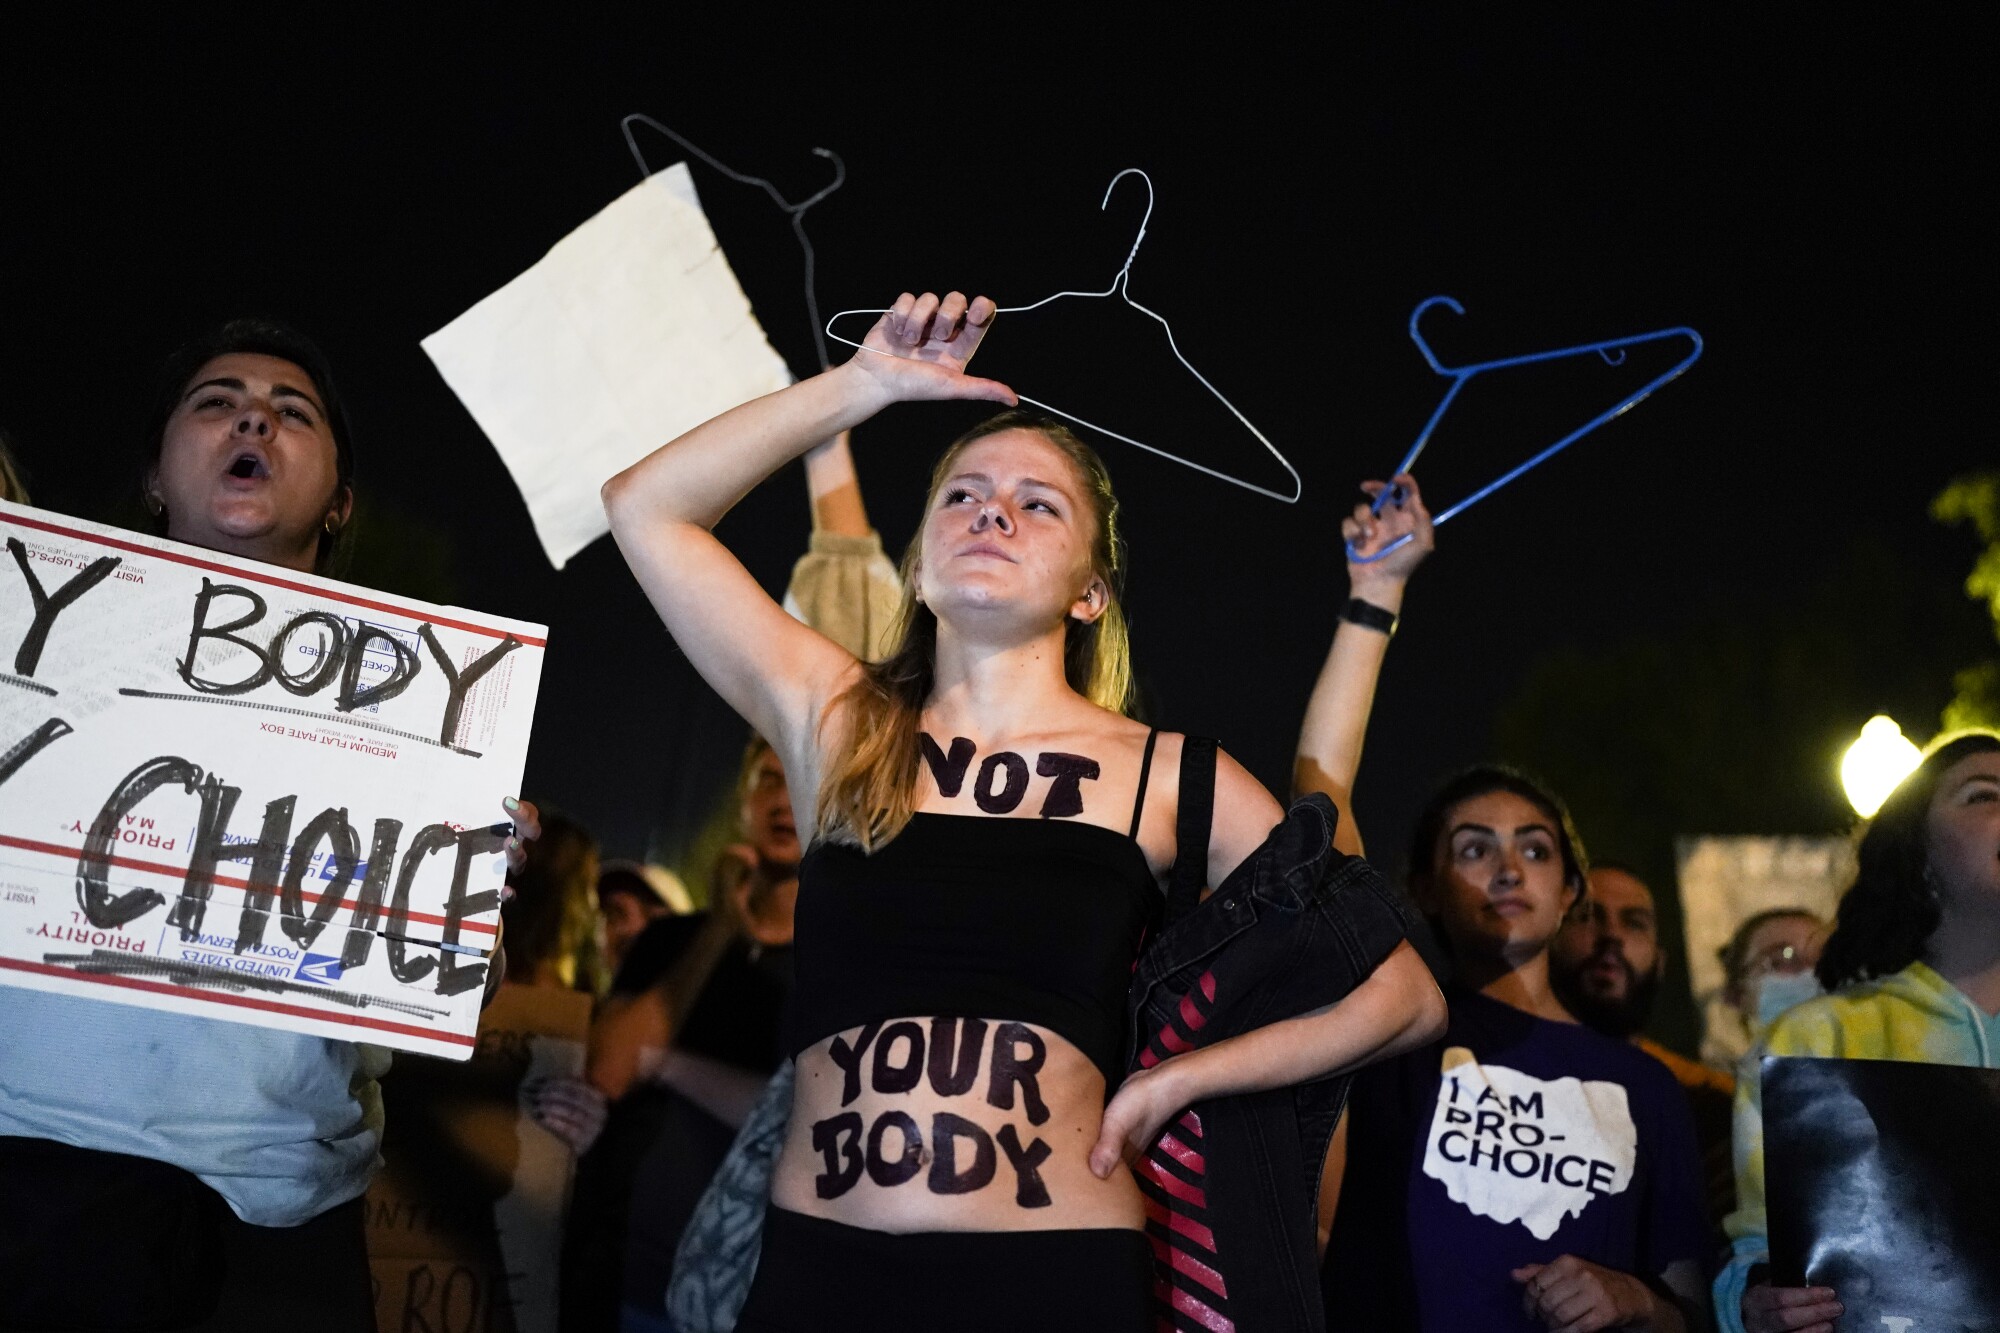 with a demonstrator "not your body" Keeps clothes hangers with other demonstrators painted on his body